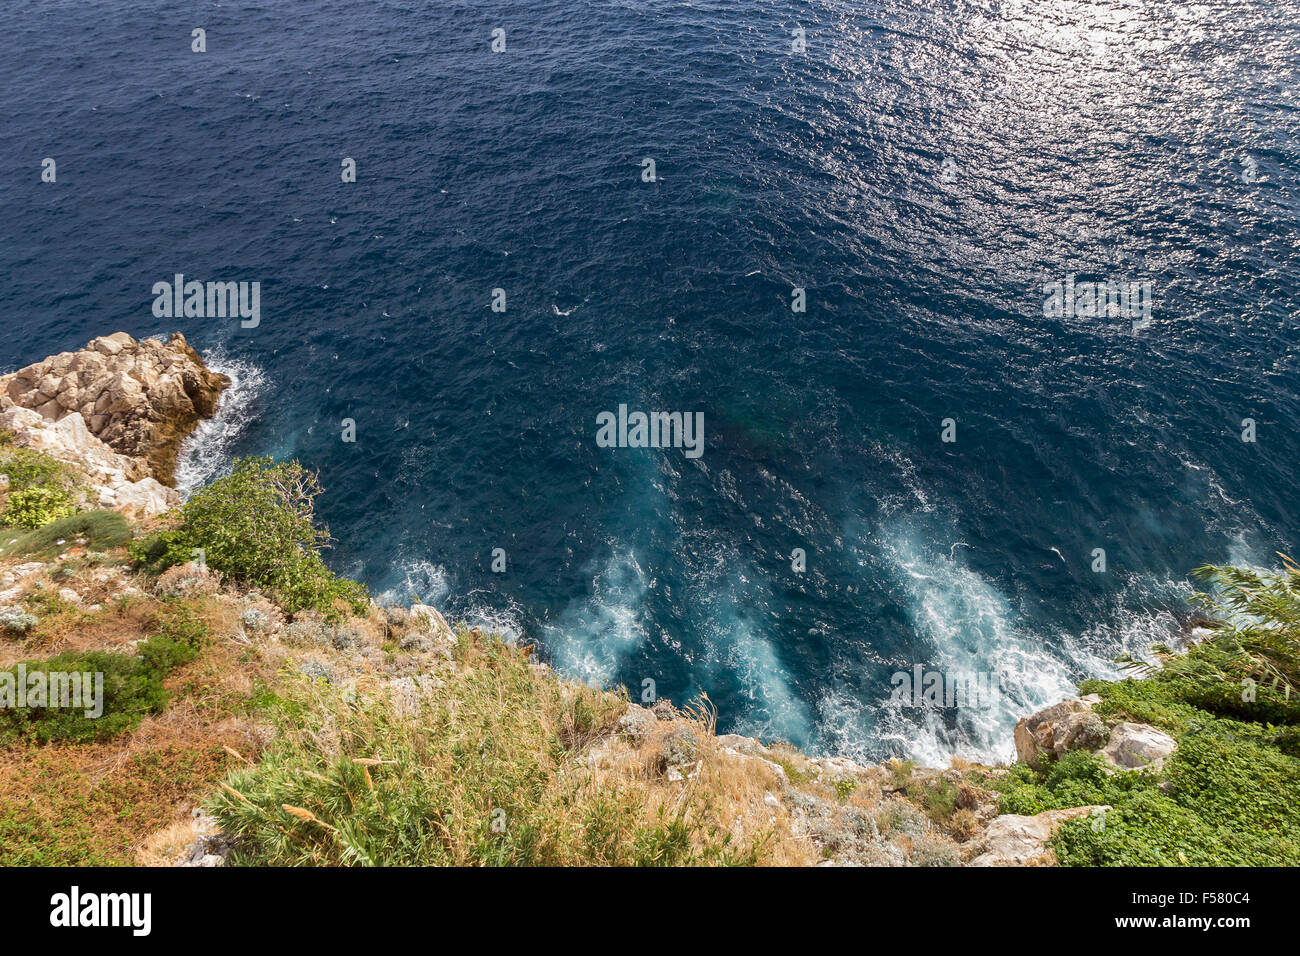 View of rocky coastline and deep blue ocean from above in Dubrovnik, Croatia. Stock Photo